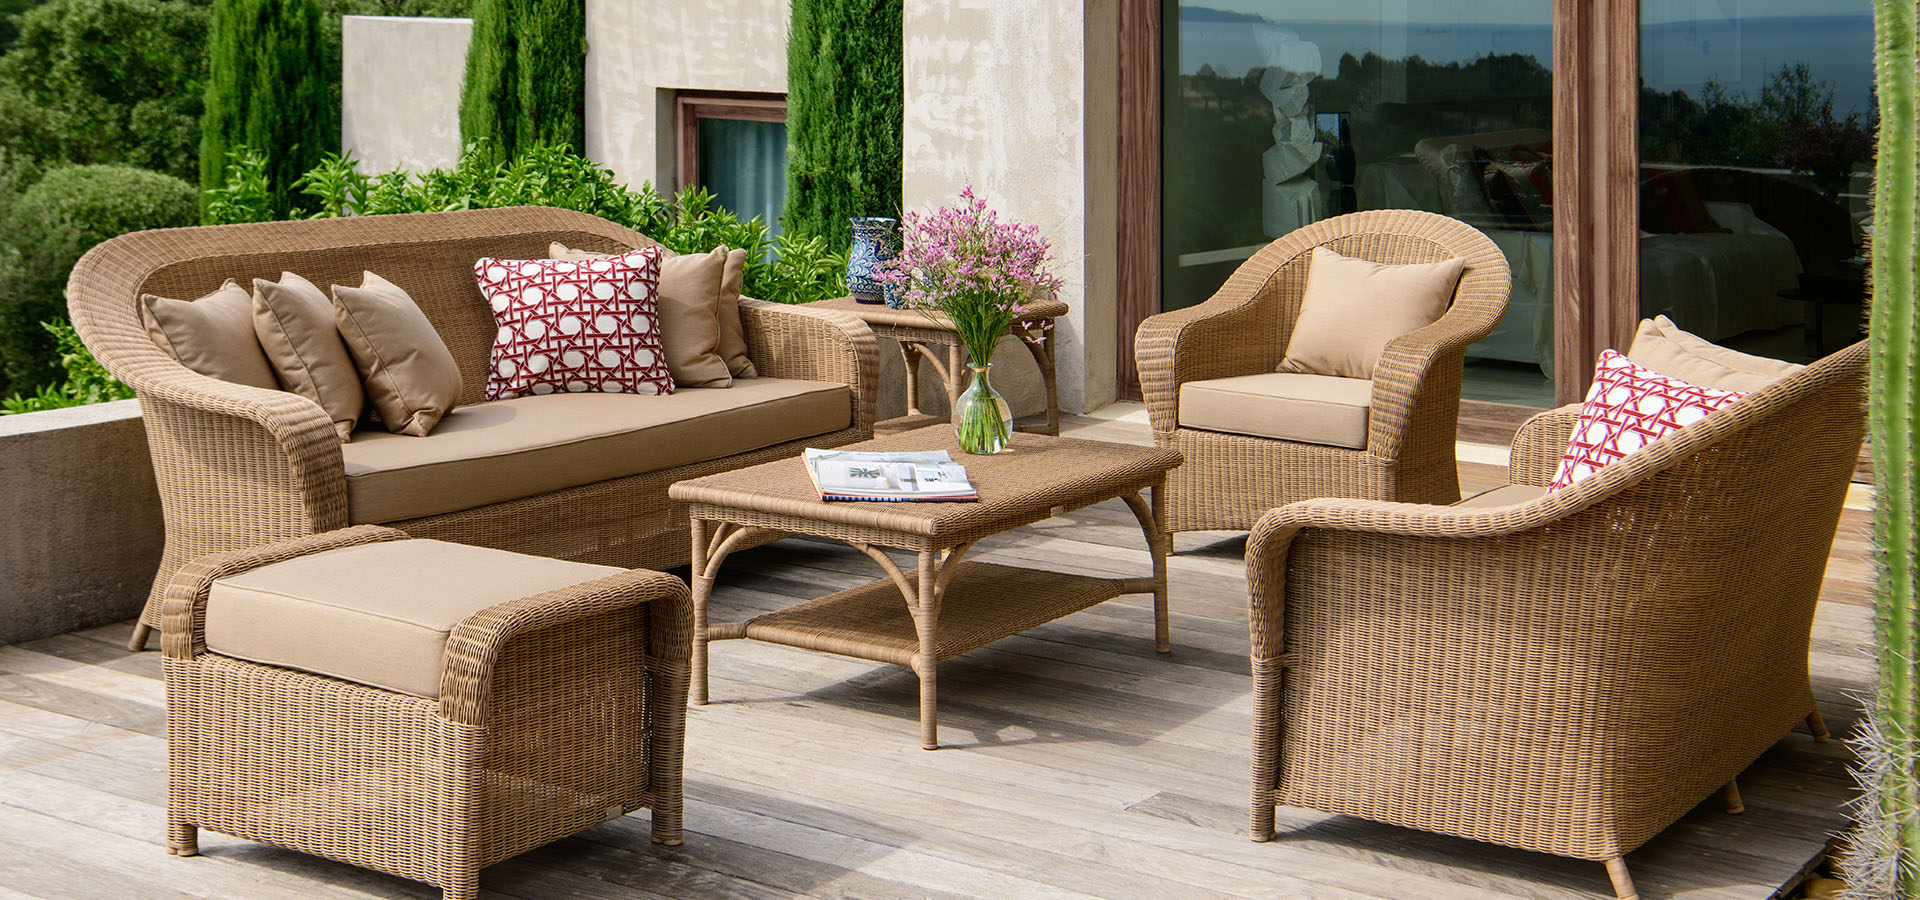 Capri Outdoor Sofa, Set of 2 Chairs and Coffee Table